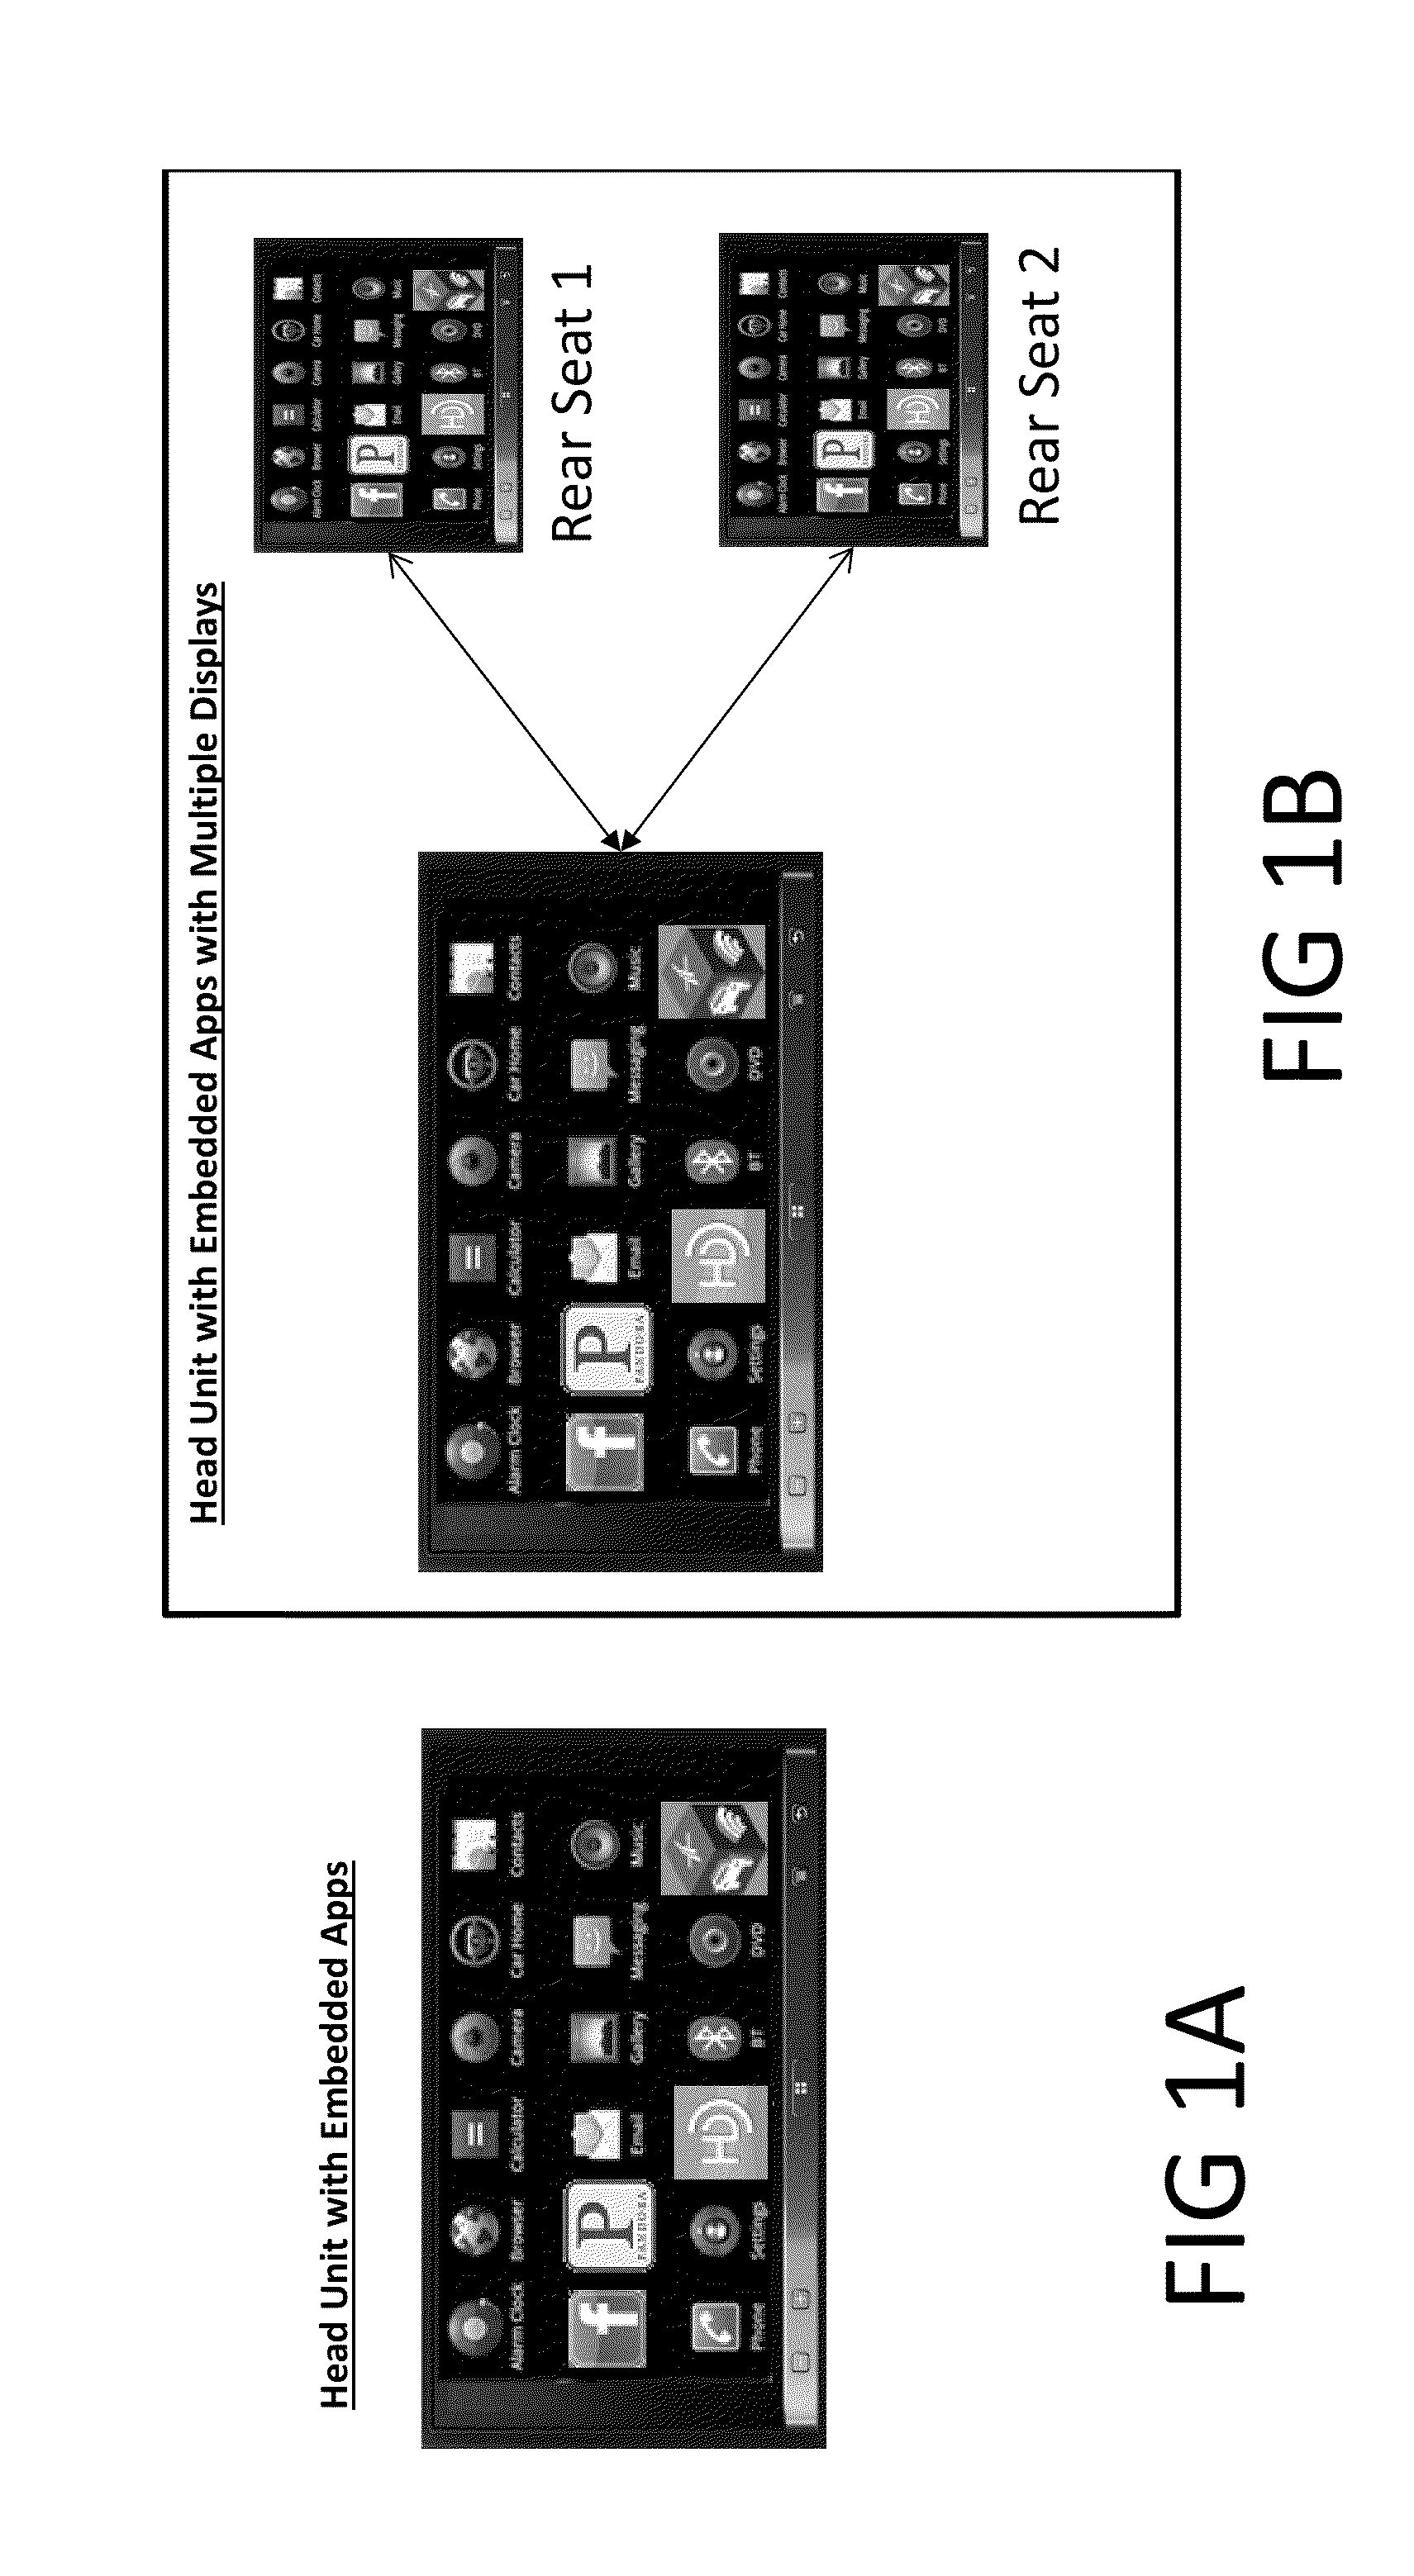 System and Method for Monitoring Apps in a Vehicle or in a Smartphone to Reduce Driver Distraction